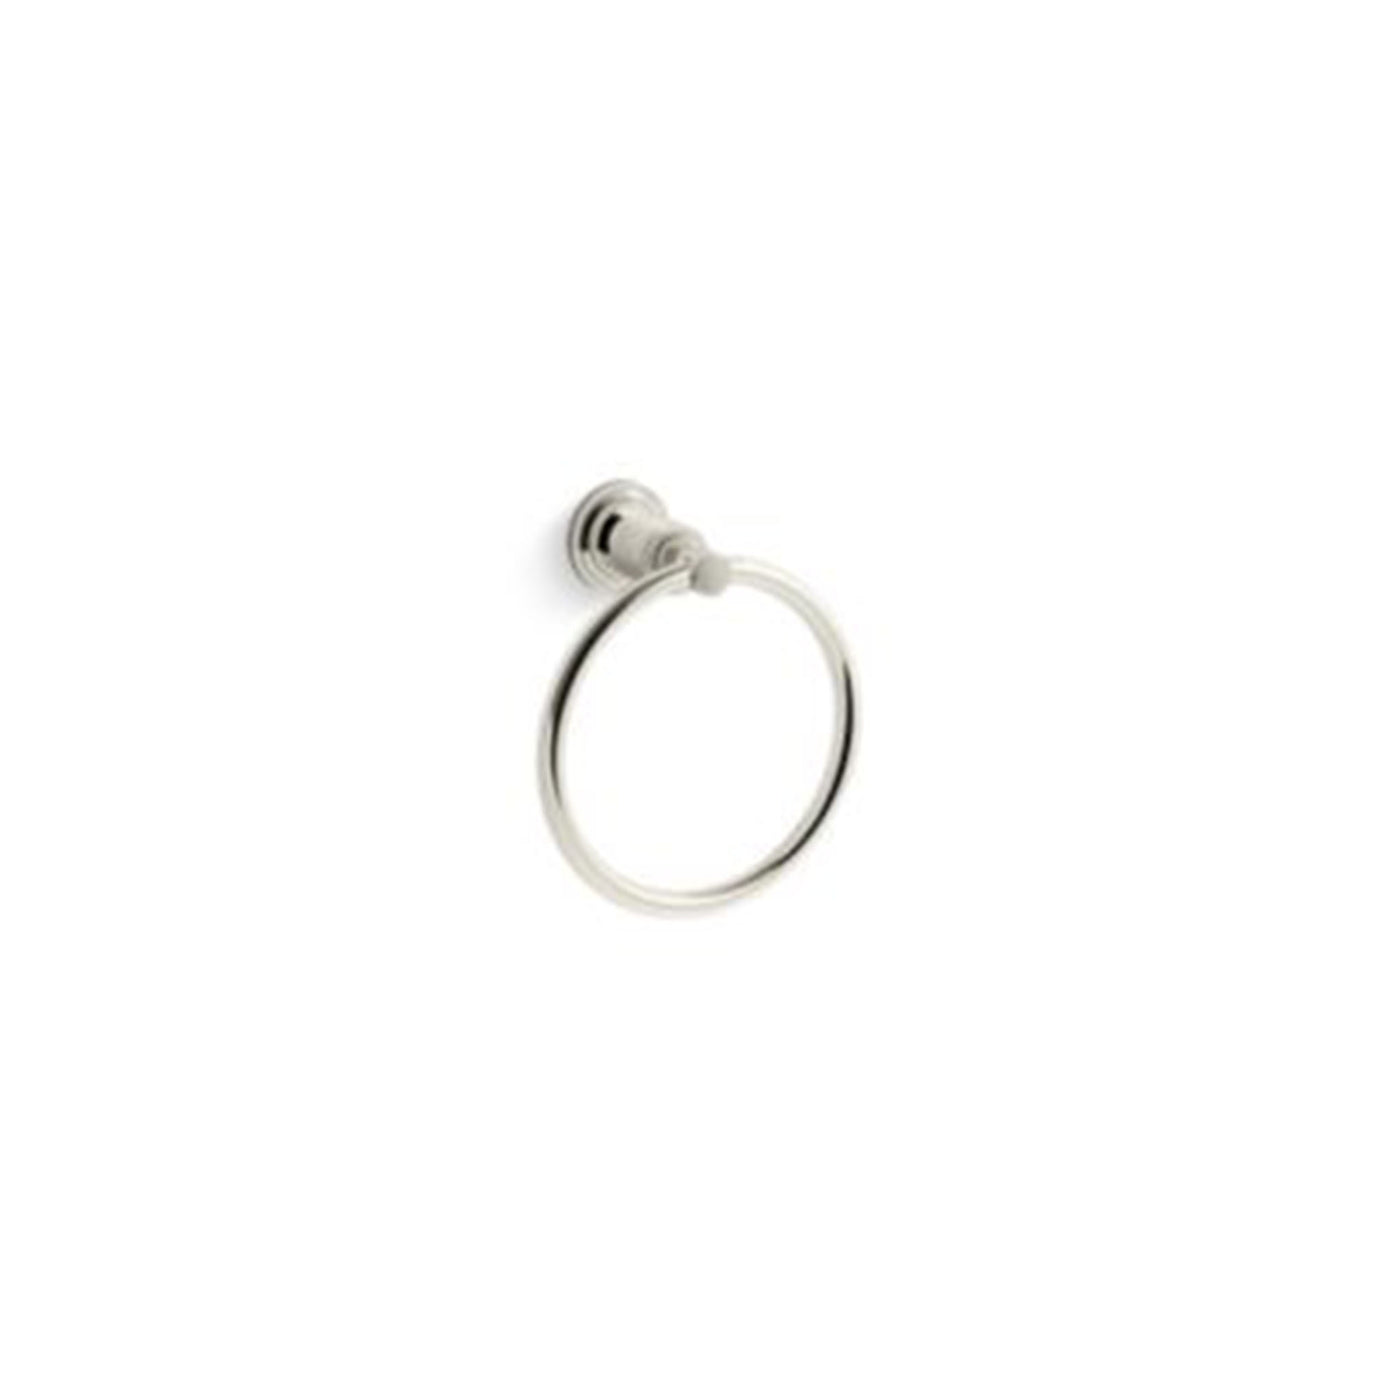 Central Park West™ by Robert A.M. Stern Architects Towel Ring